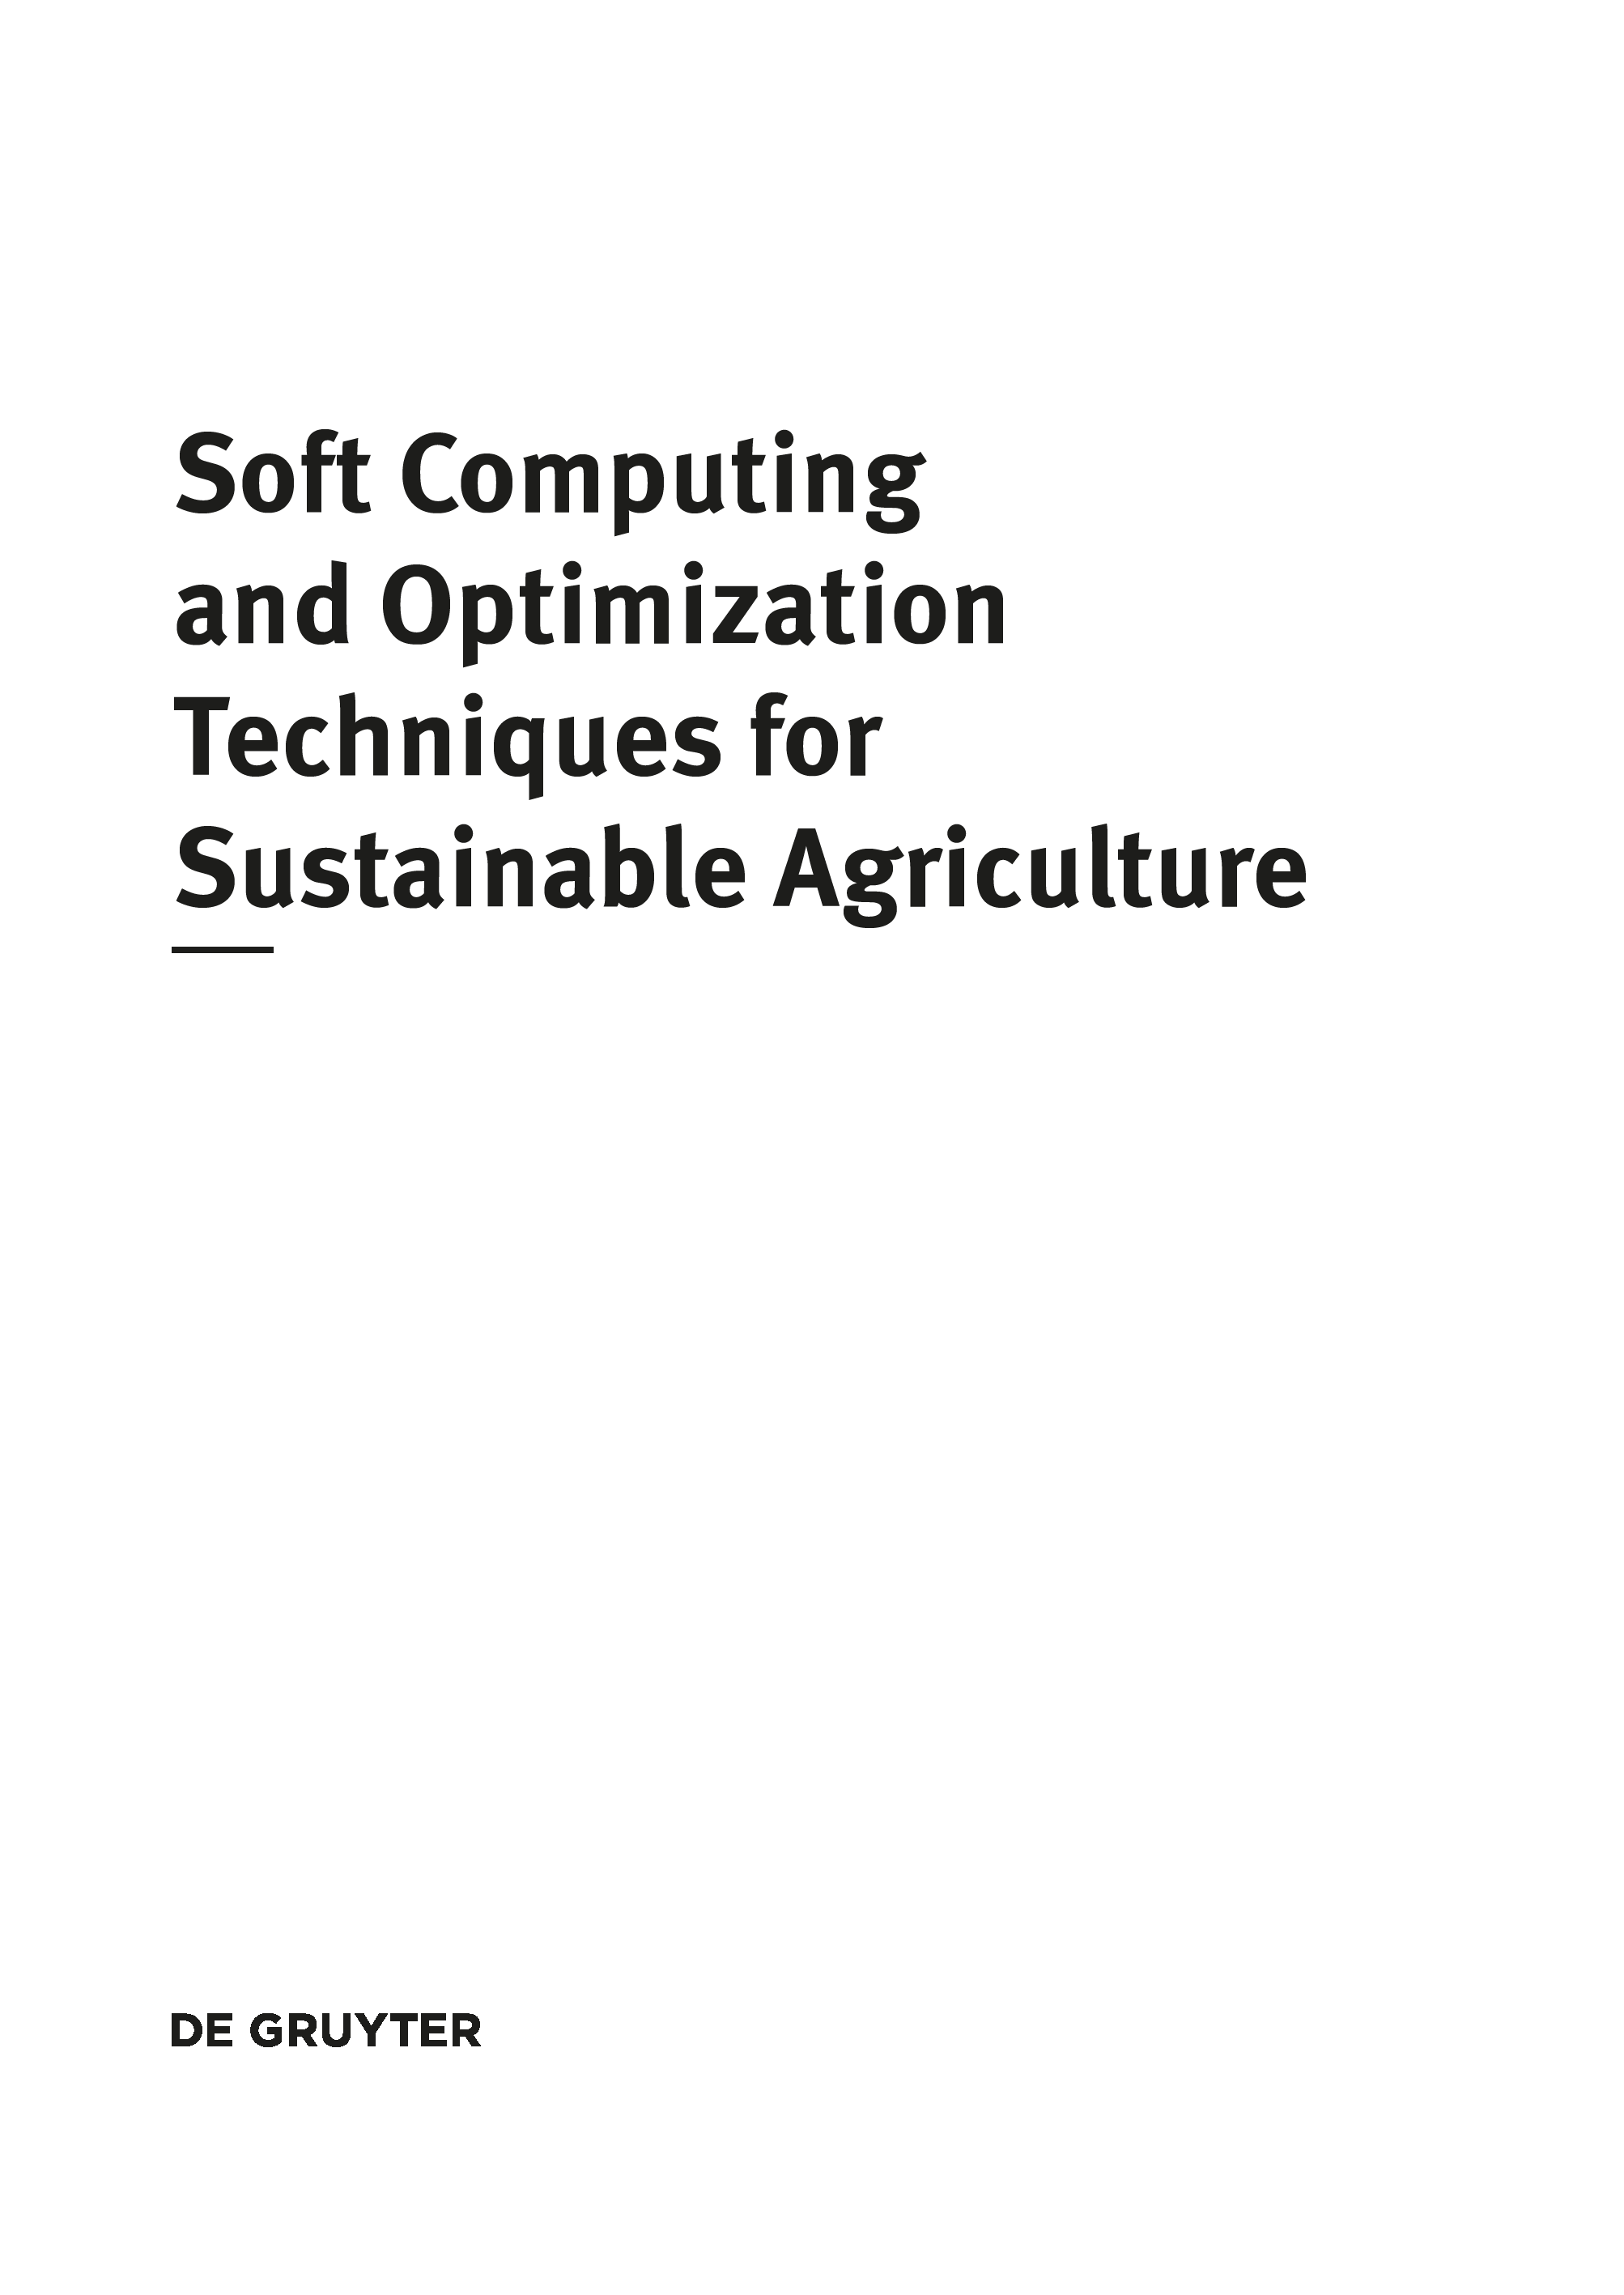 Soft Computing and Optimization Techniques for Sustainable Agriculture - photo 3